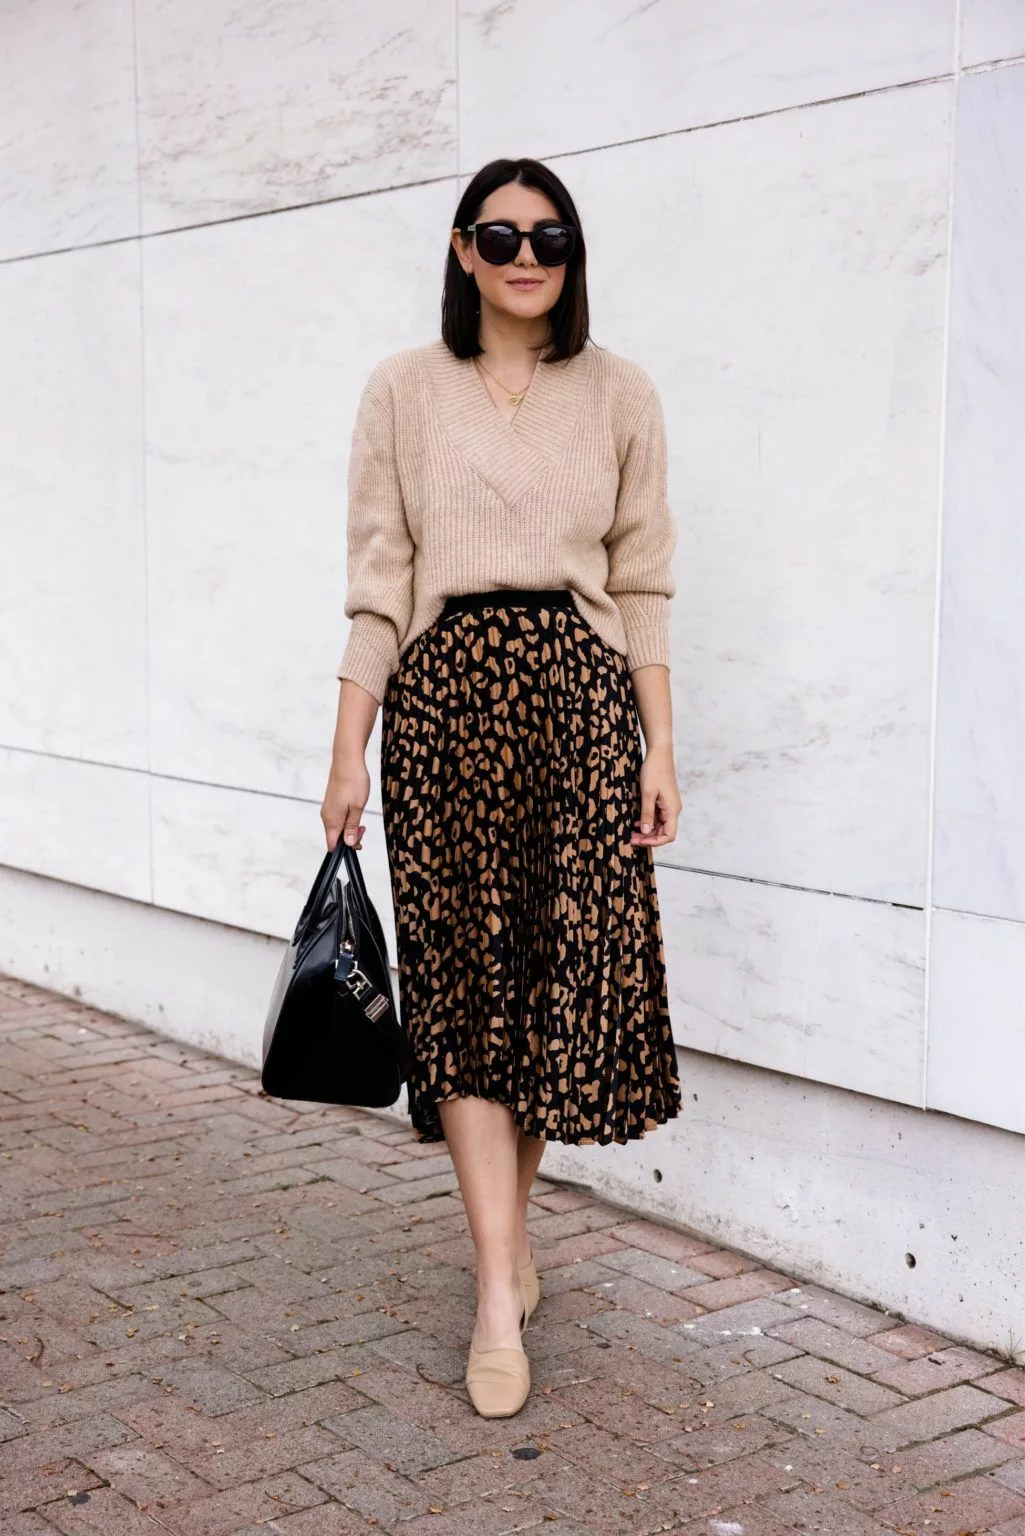 Chic and Confident: Stylish Spring Outfits for Women Over 40